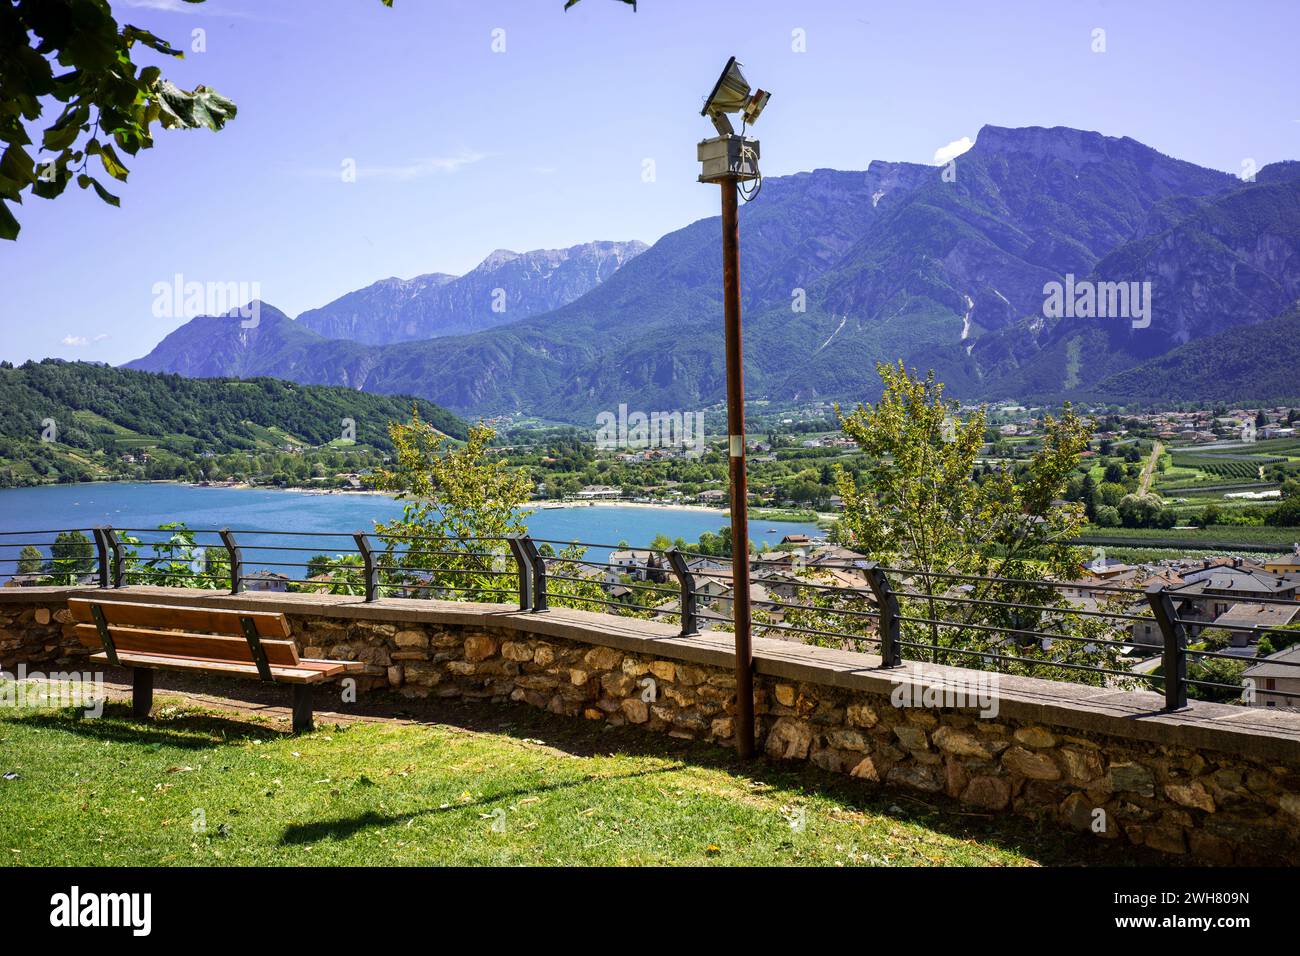 the tranquility of the view of a lake and mountains sitting on a bench Stock Photo